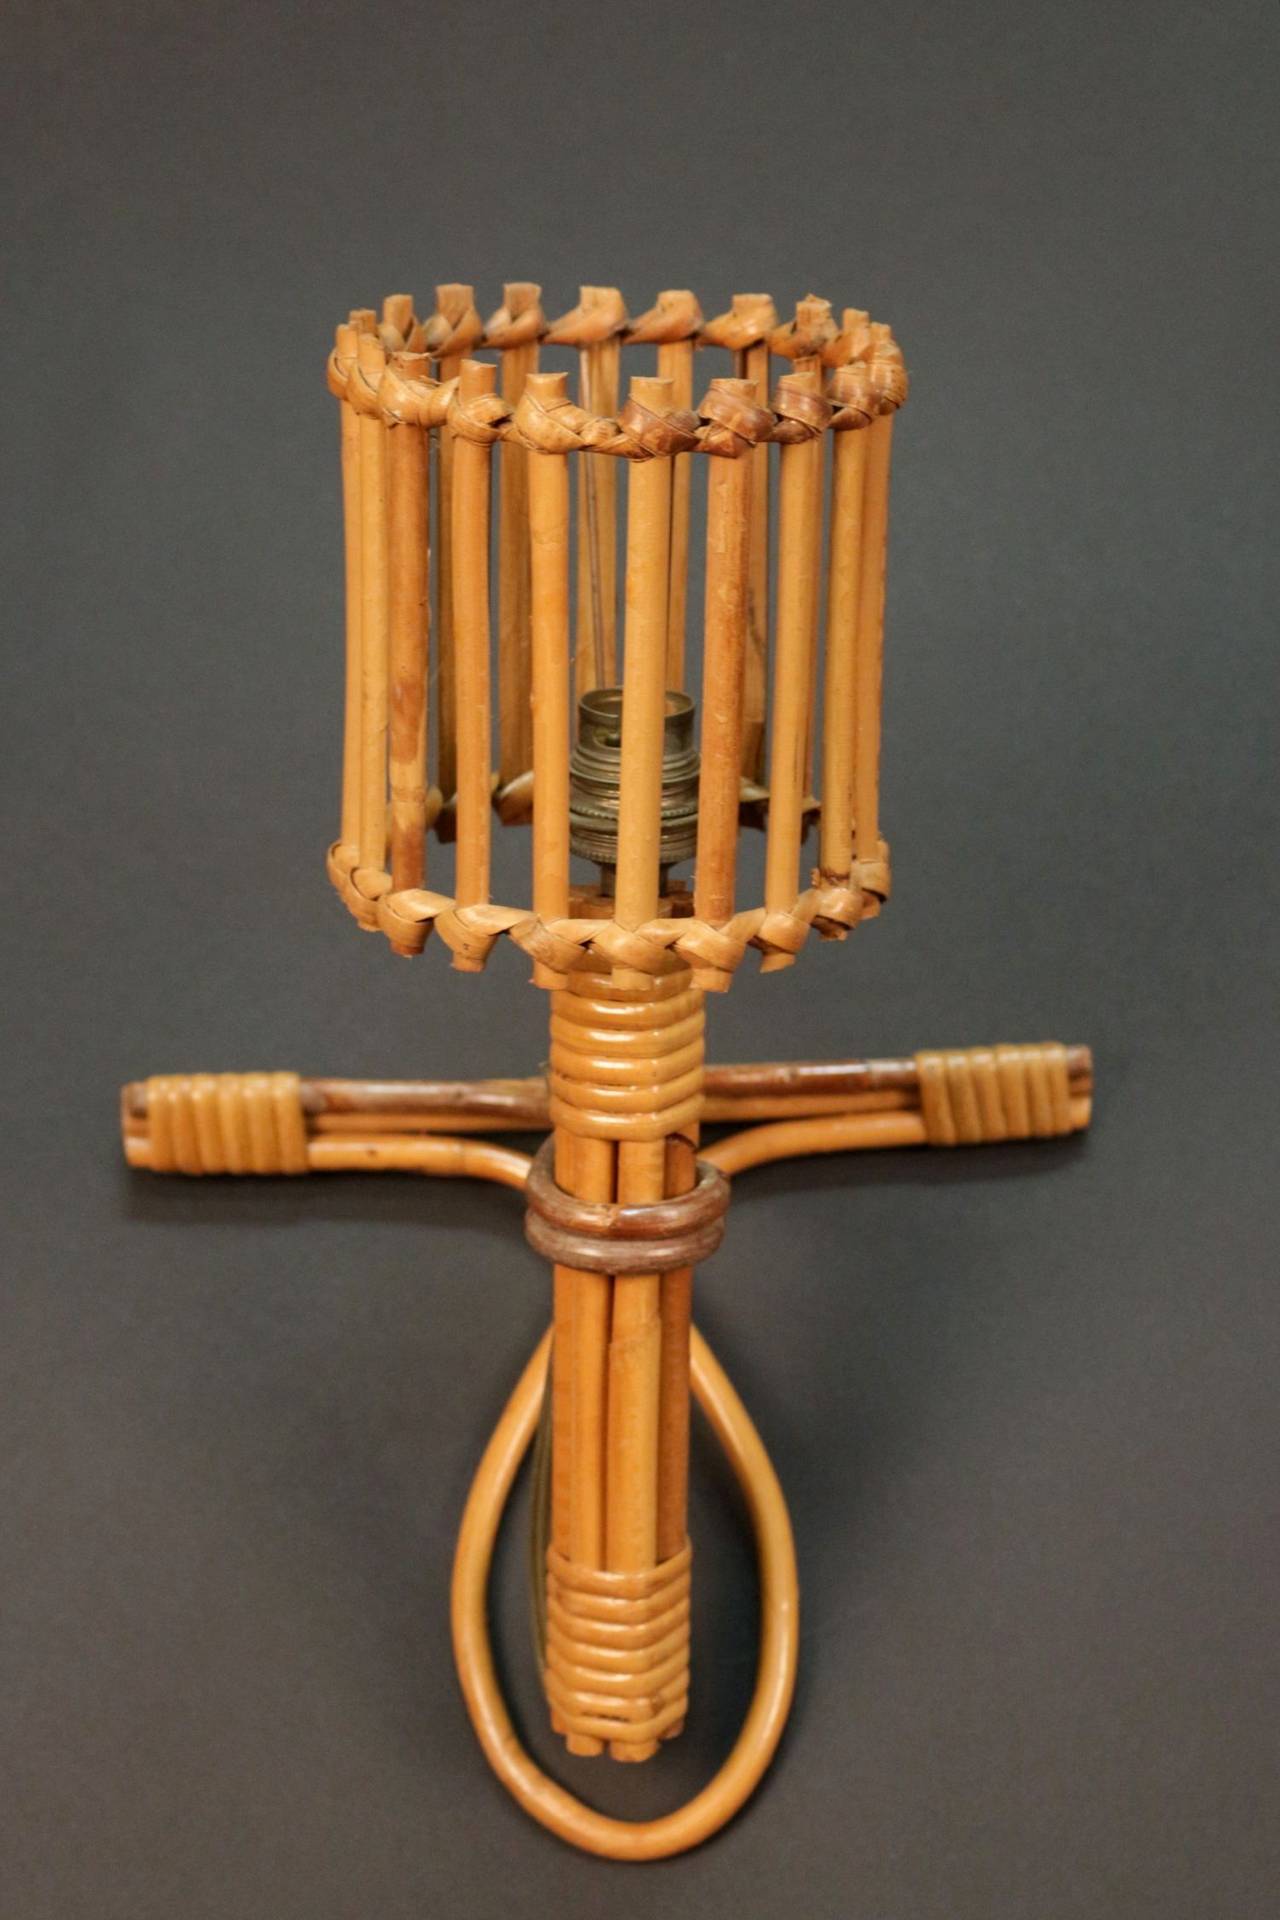 Pair of 1950s 'Bird Cage' rattan sconces. One lighted arm surrounded by a rattan cage. Each sconce is outlined by a rattan knot.